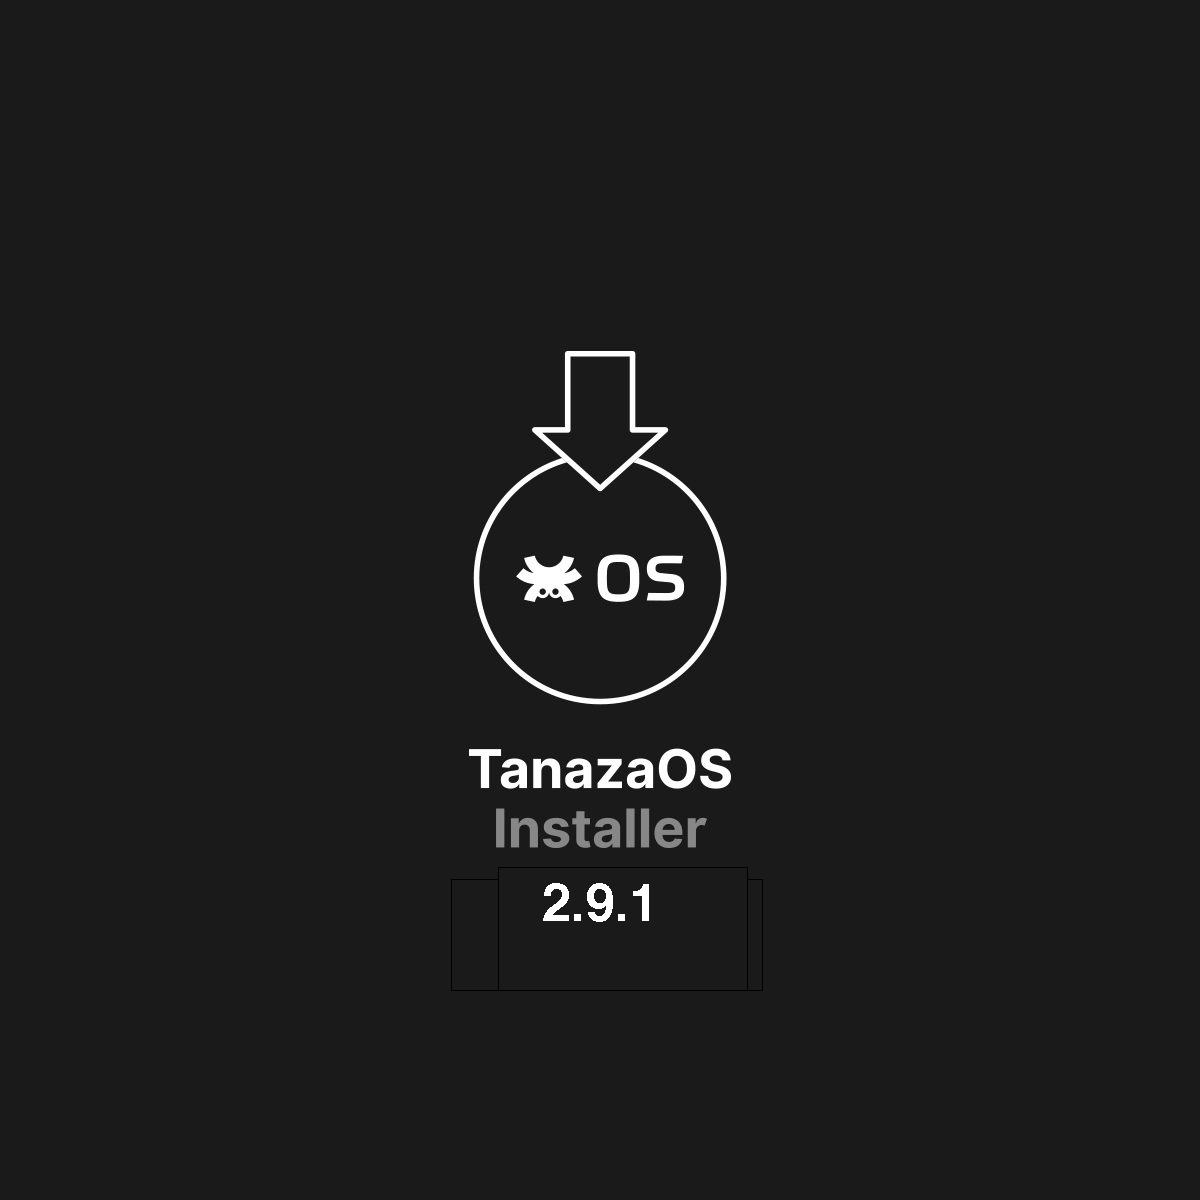 Tanaza Installer 2.9.1 - Access Point Scanner